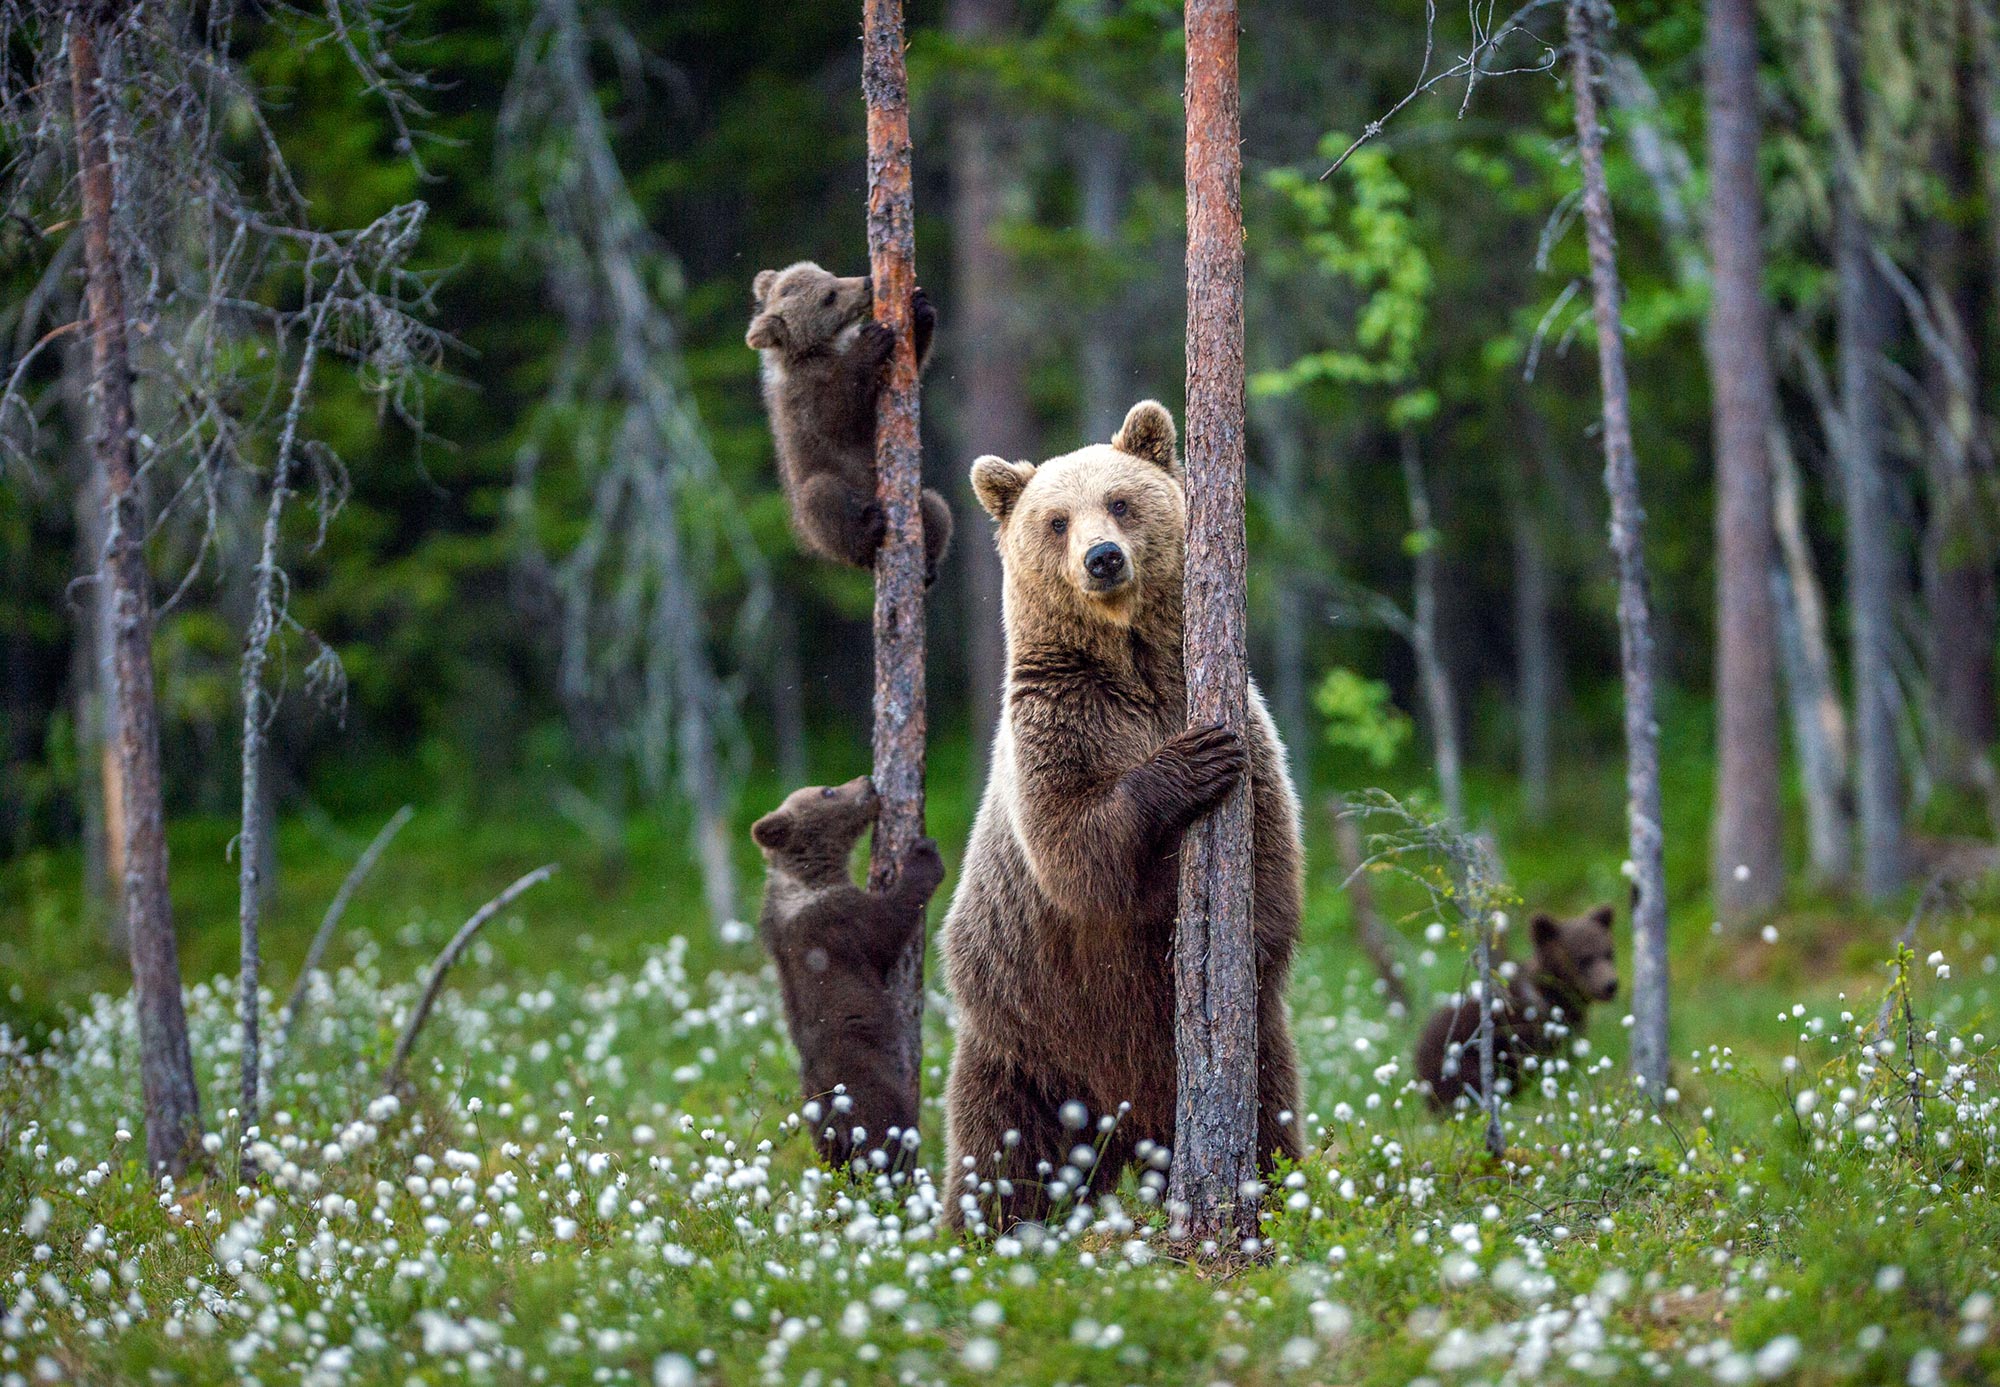 A grizzly bear mother with her cubs climbing trees behind her in the forest.